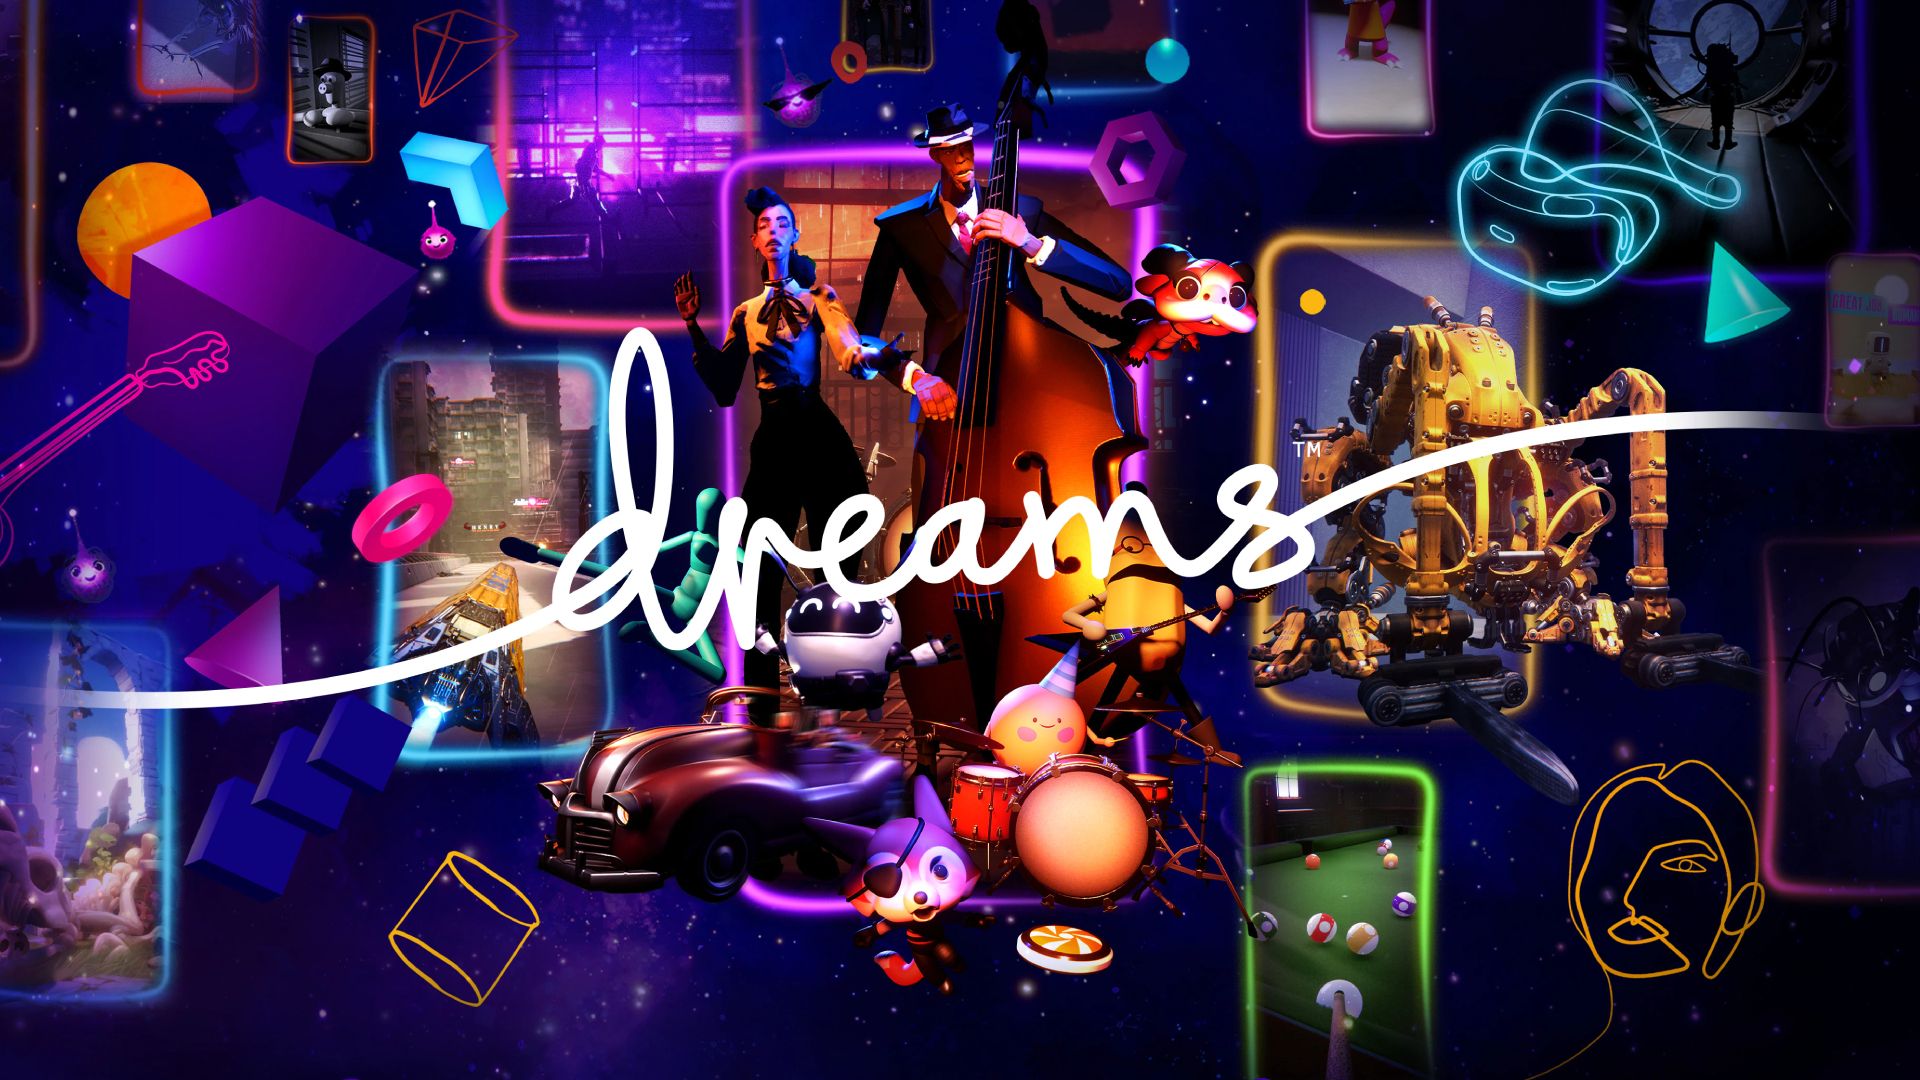 Dreams PS5 game creation tool